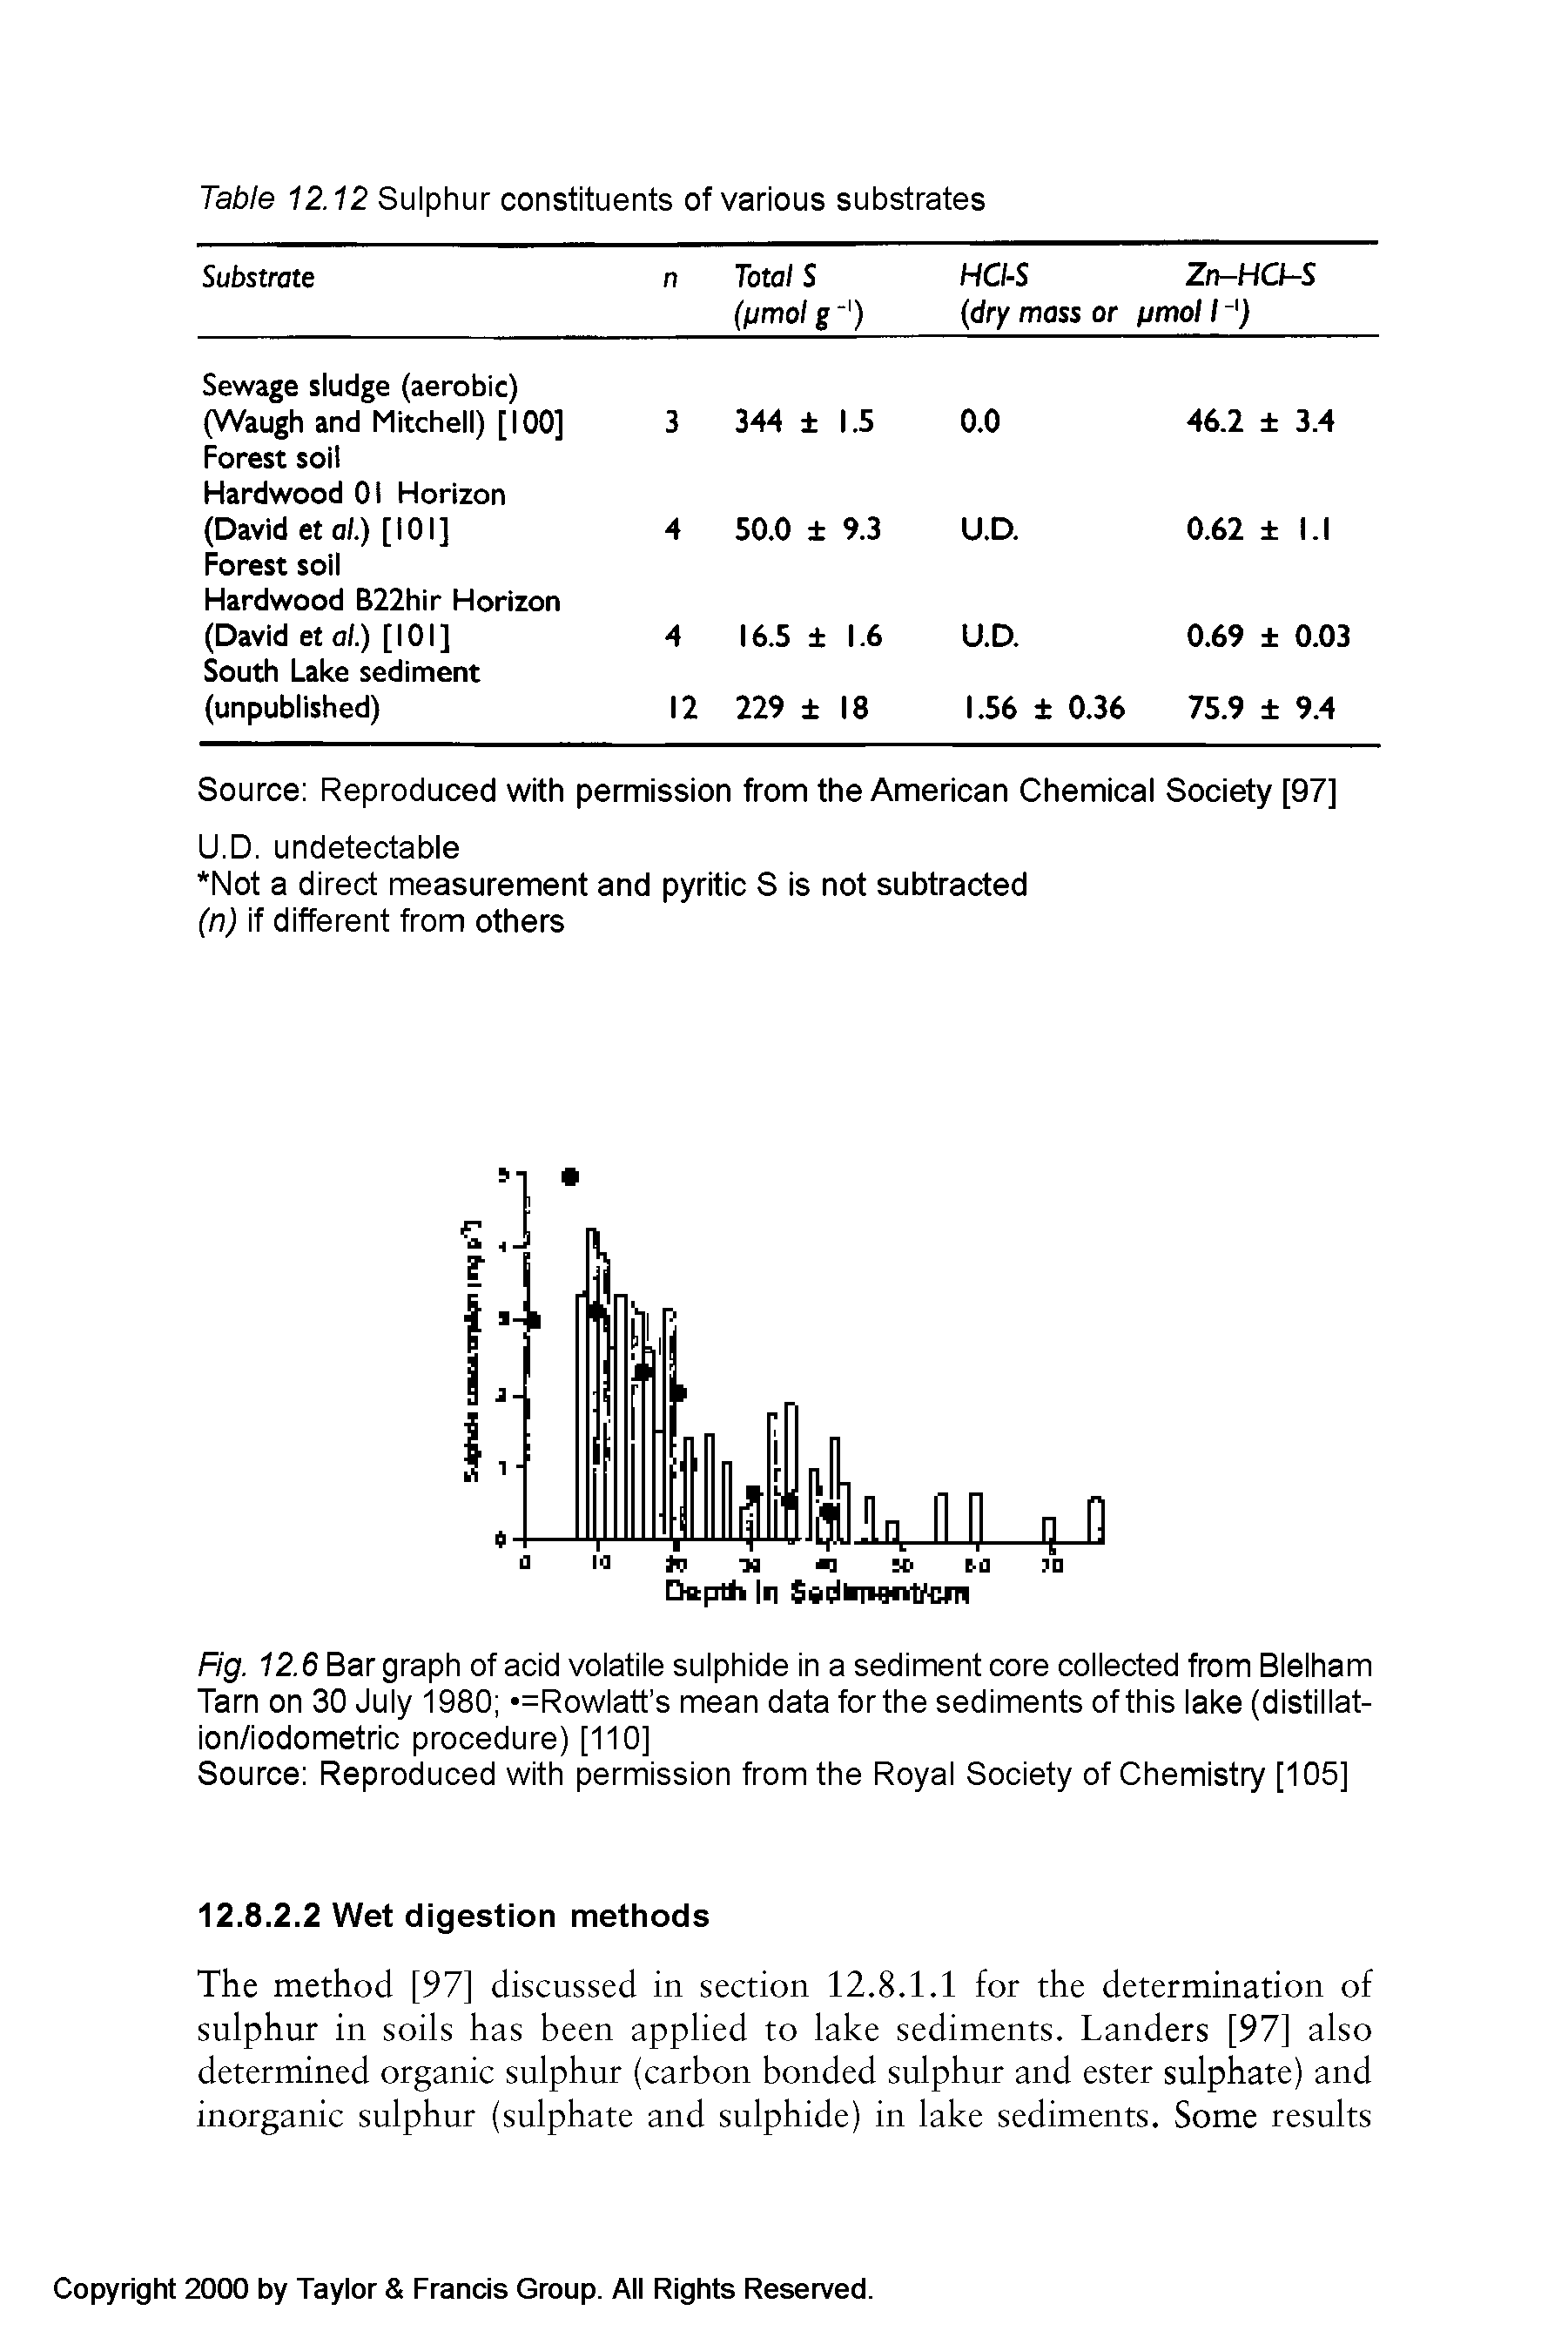 Fig. 12.6 Bar graph of acid volatile sulphide in a sediment core collected from Blelham Tarn on 30 July 1980 Rowlatt s mean data forthe sediments of this lake (distillat-ion/iodometric procedure) [110]...